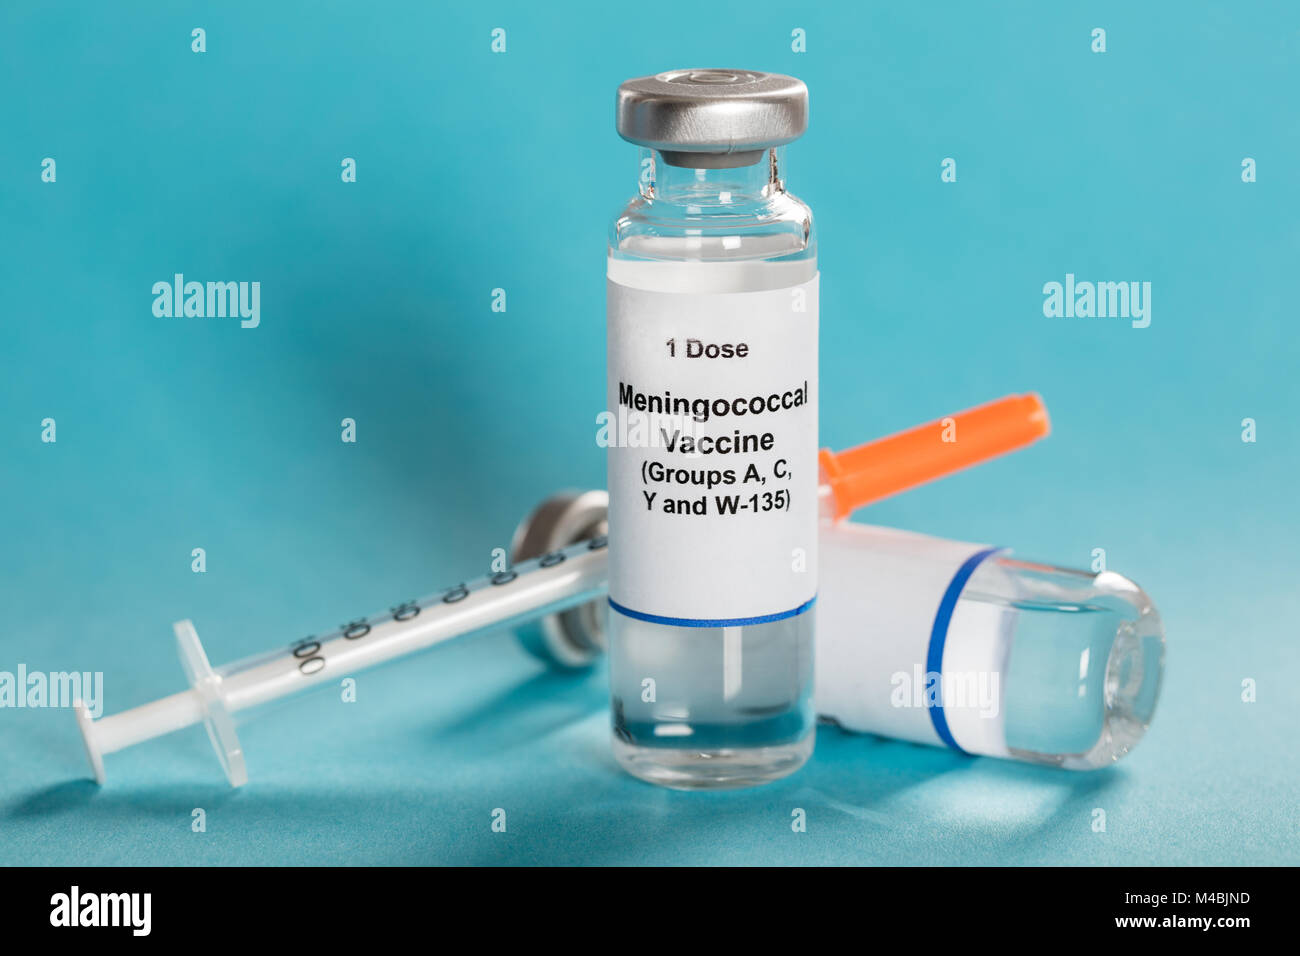 One Dose Of Meningococcal Vaccine In Vials With Syringe Over Turquoise Background Stock Photo